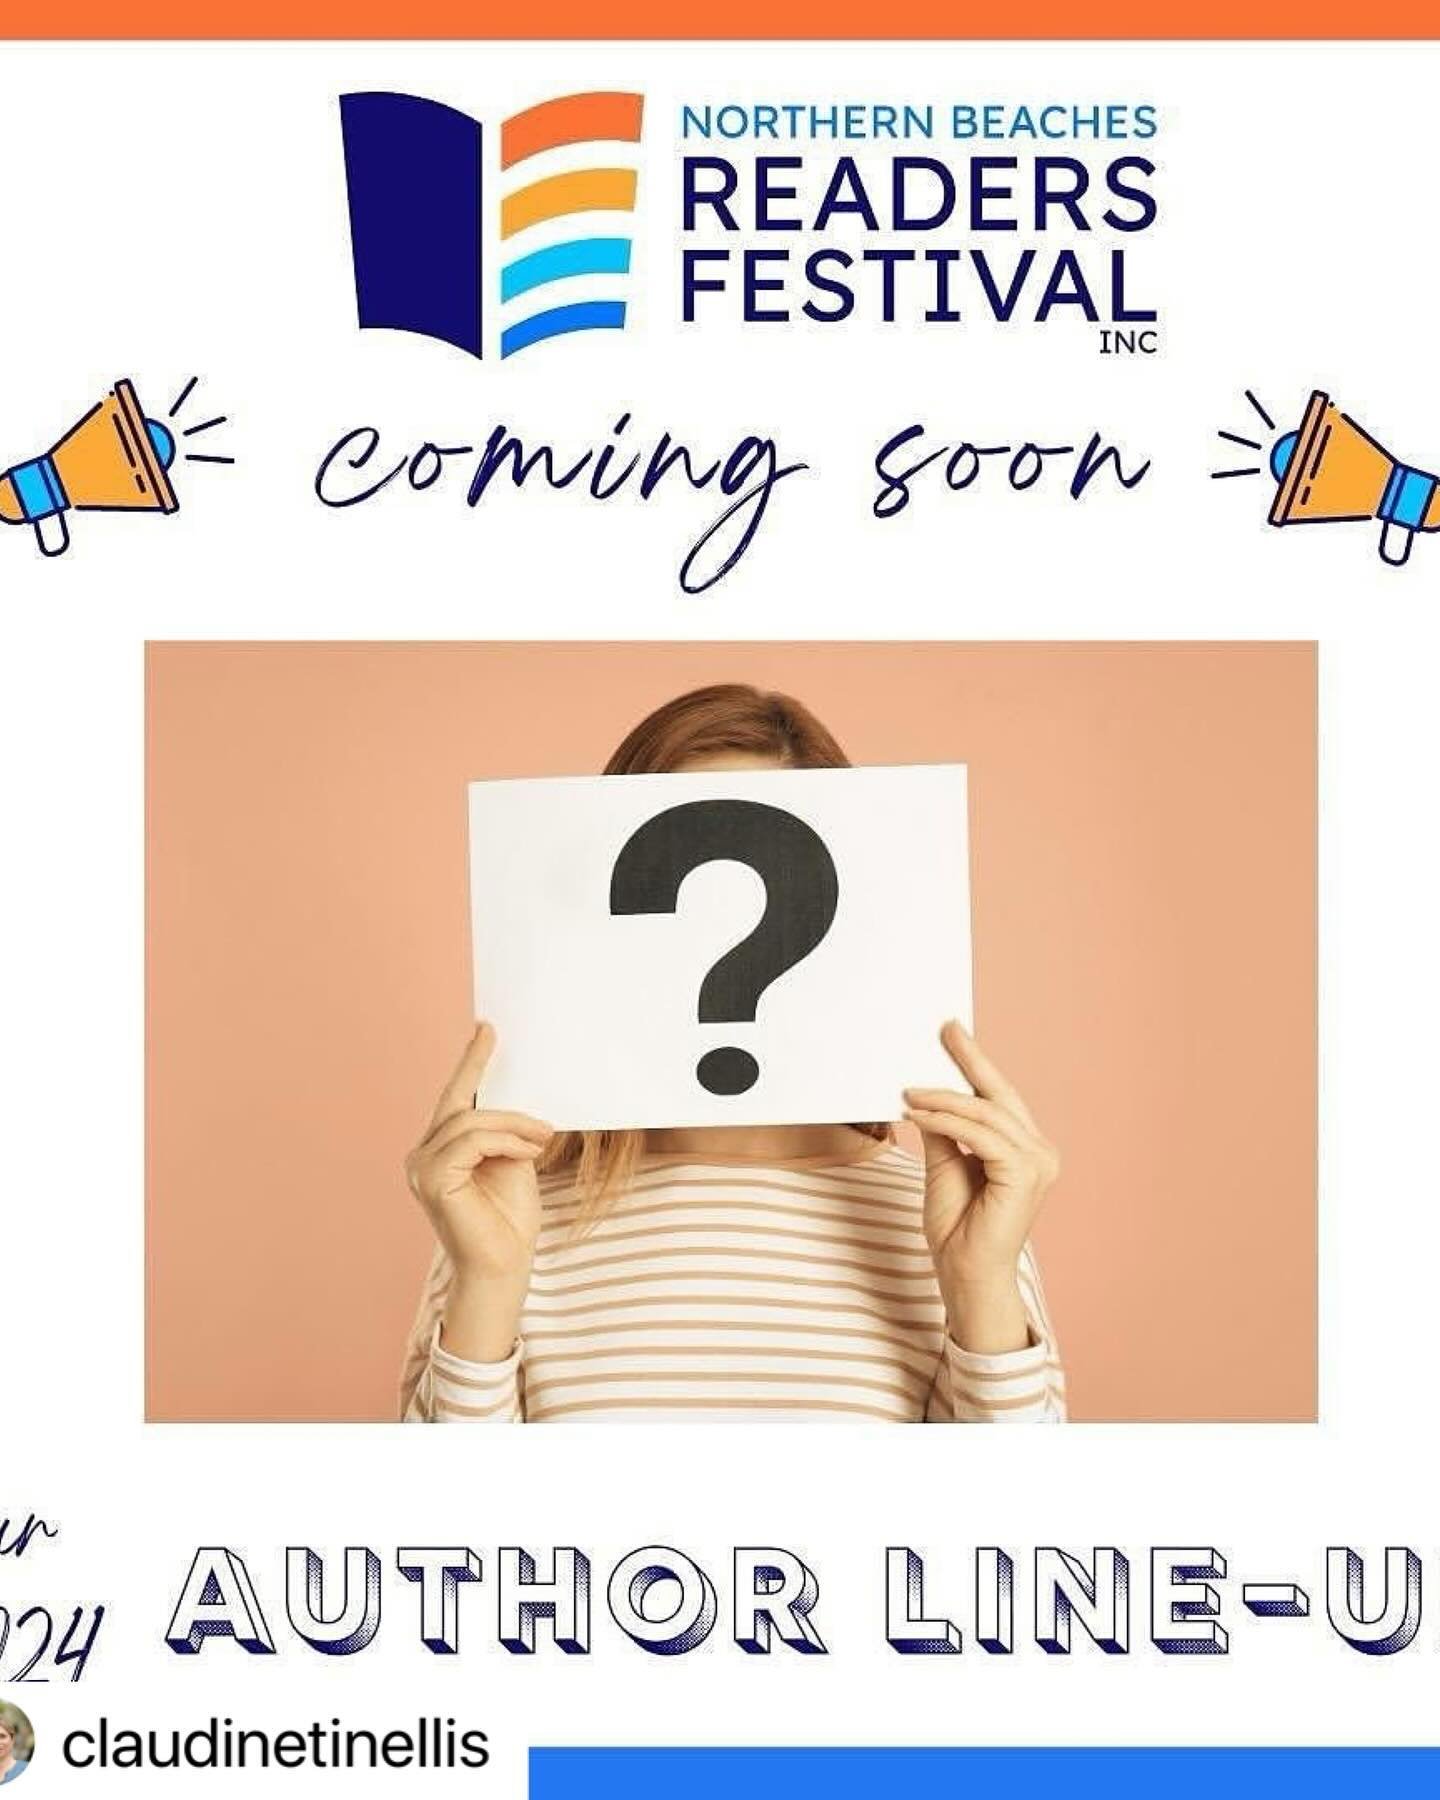 💙 Sign up to the NBRF newsletter to be the first to see the fabulous authors the festival will be bringing you on 27 - 29 September at Avalon Beach in  NSW 💙